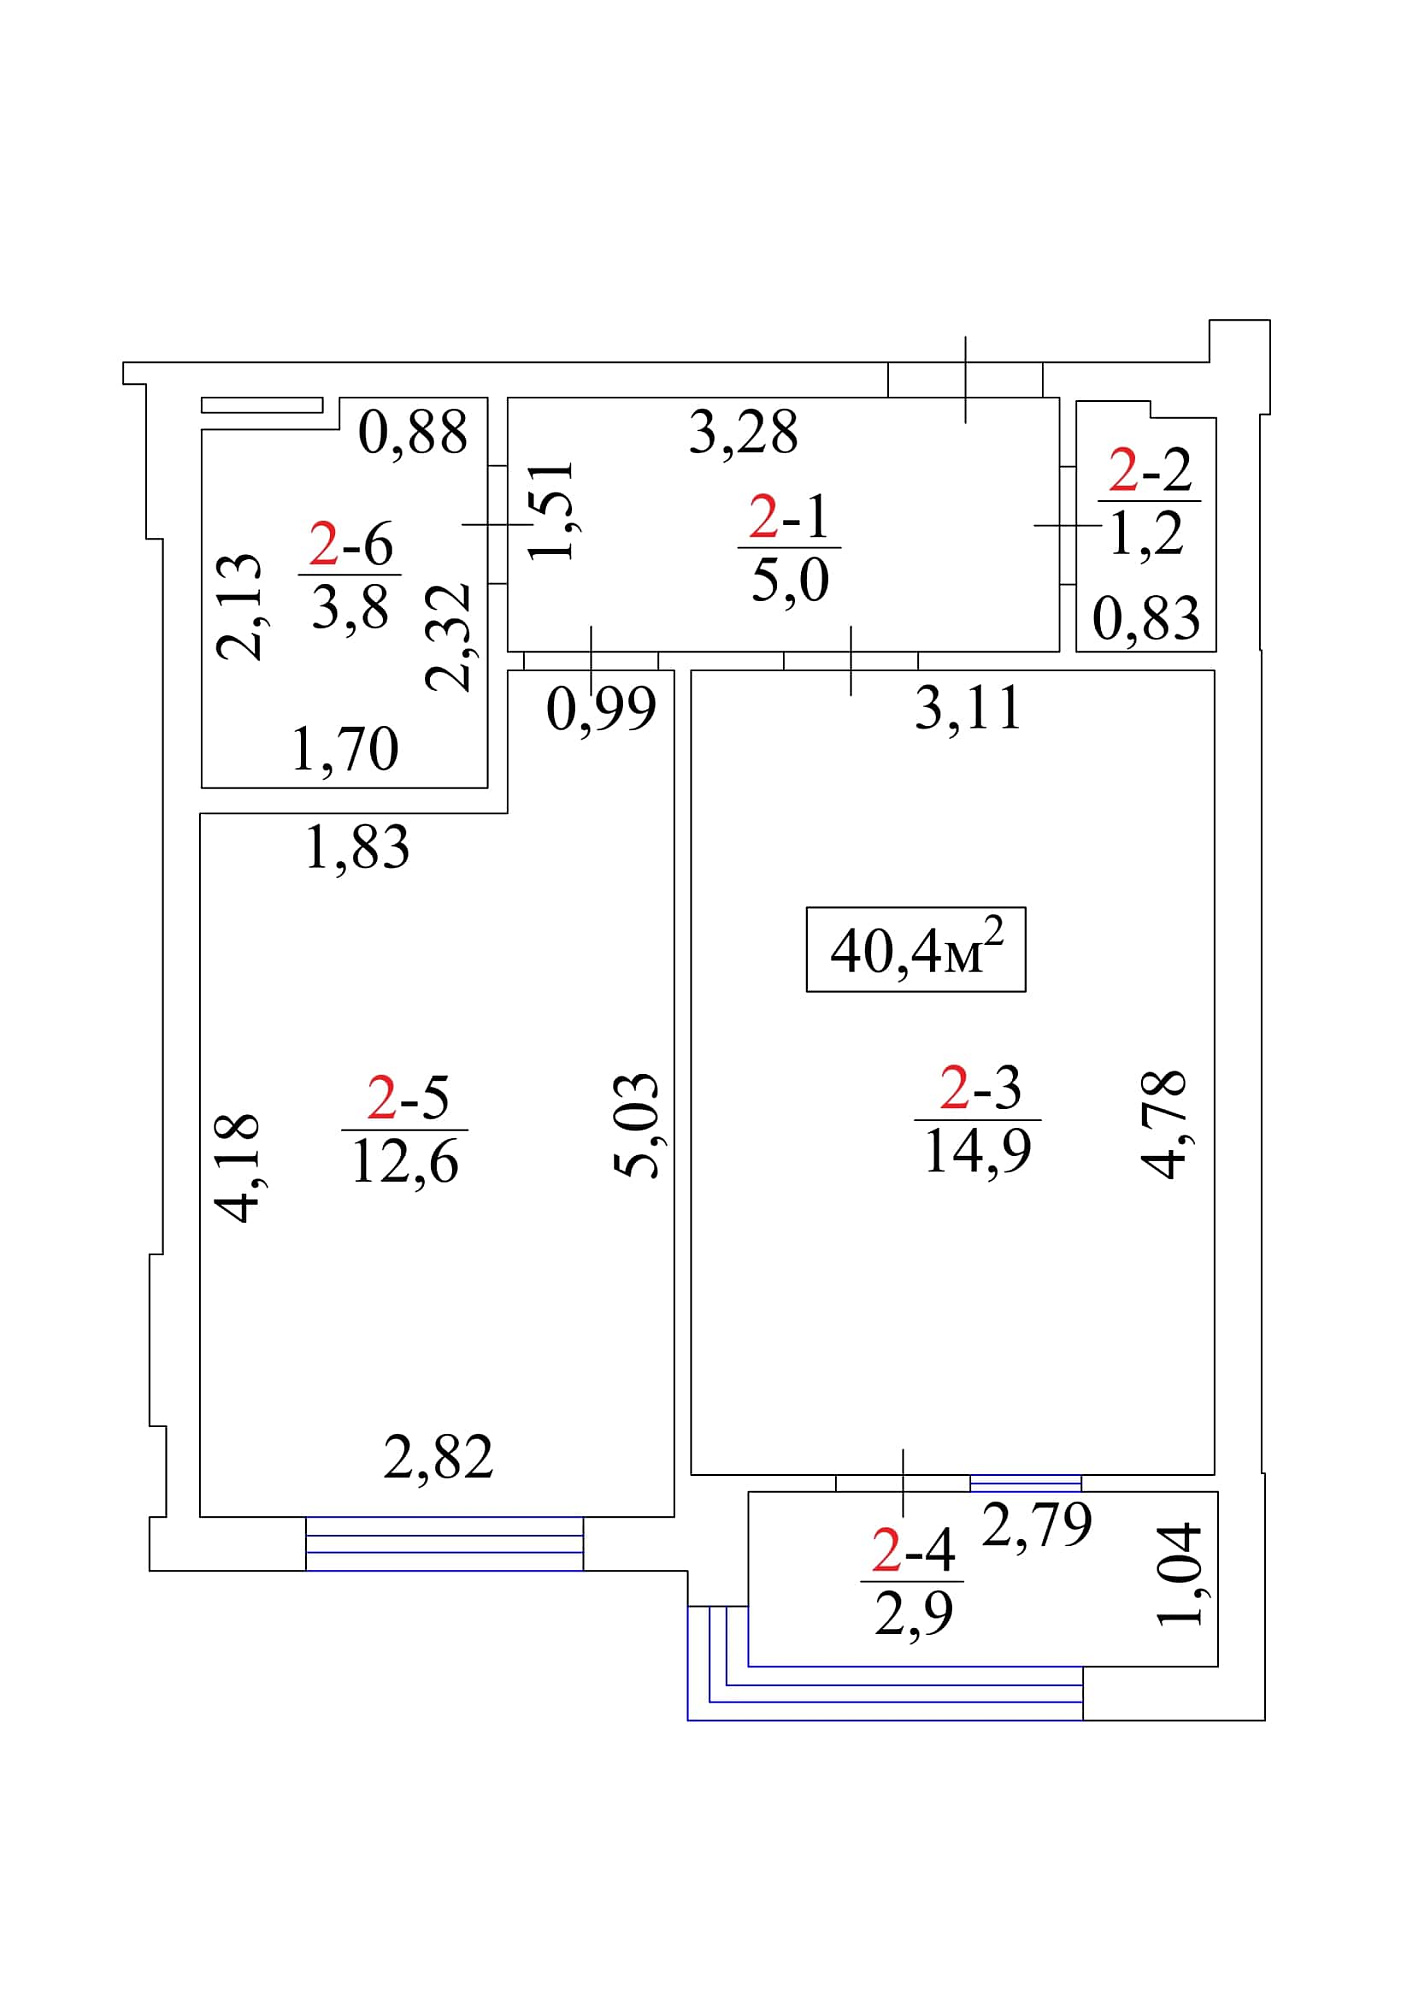 Planning 1-rm flats area 40.4m2, AB-01-01/00002.